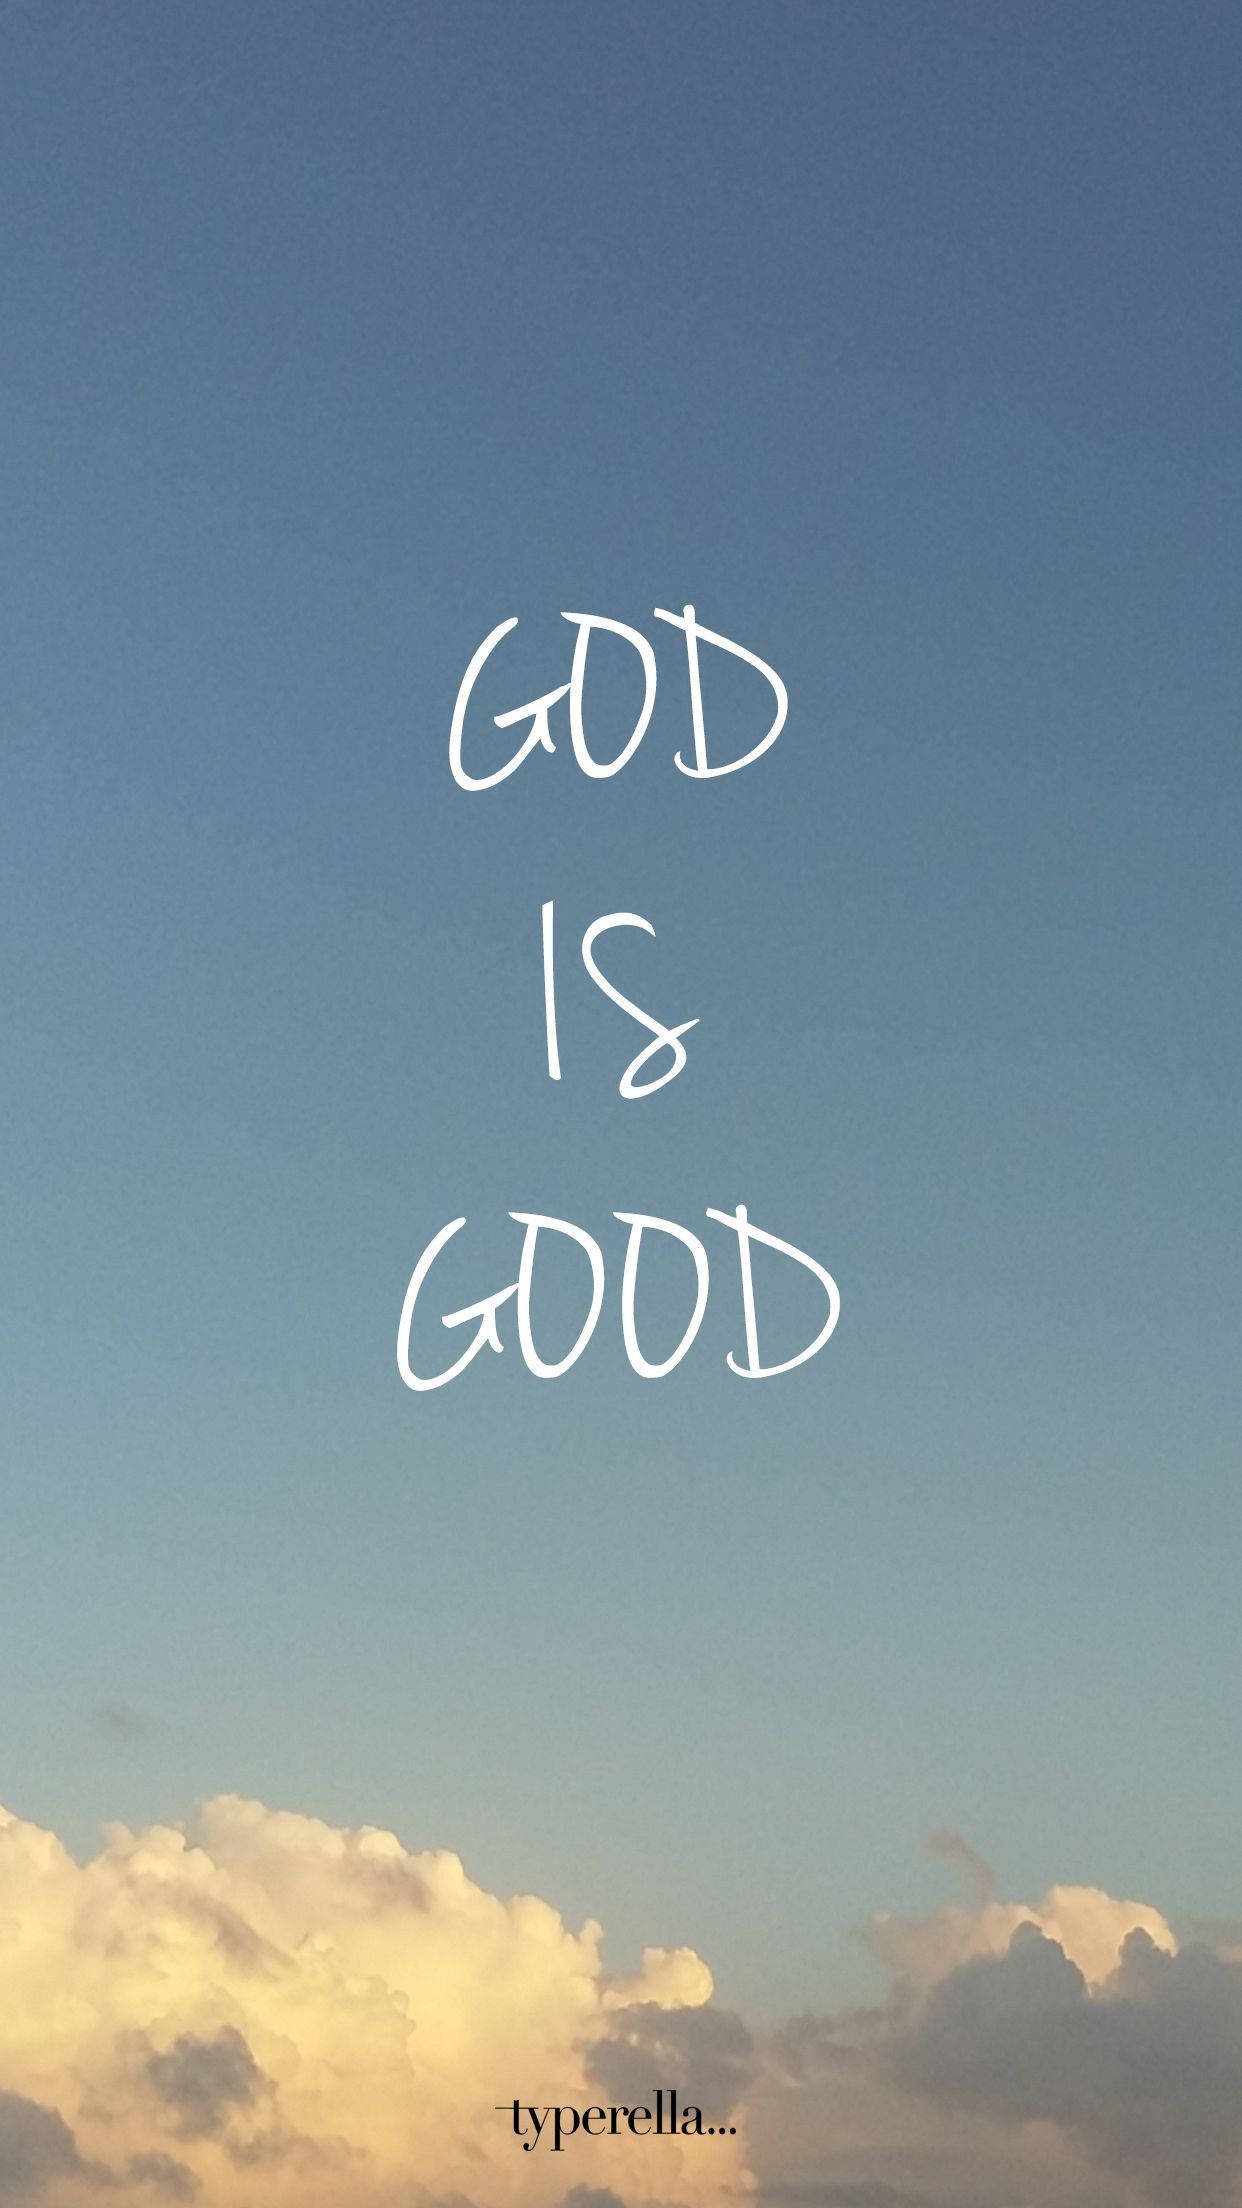 Download God Is Good Christian Iphone Wallpaper 